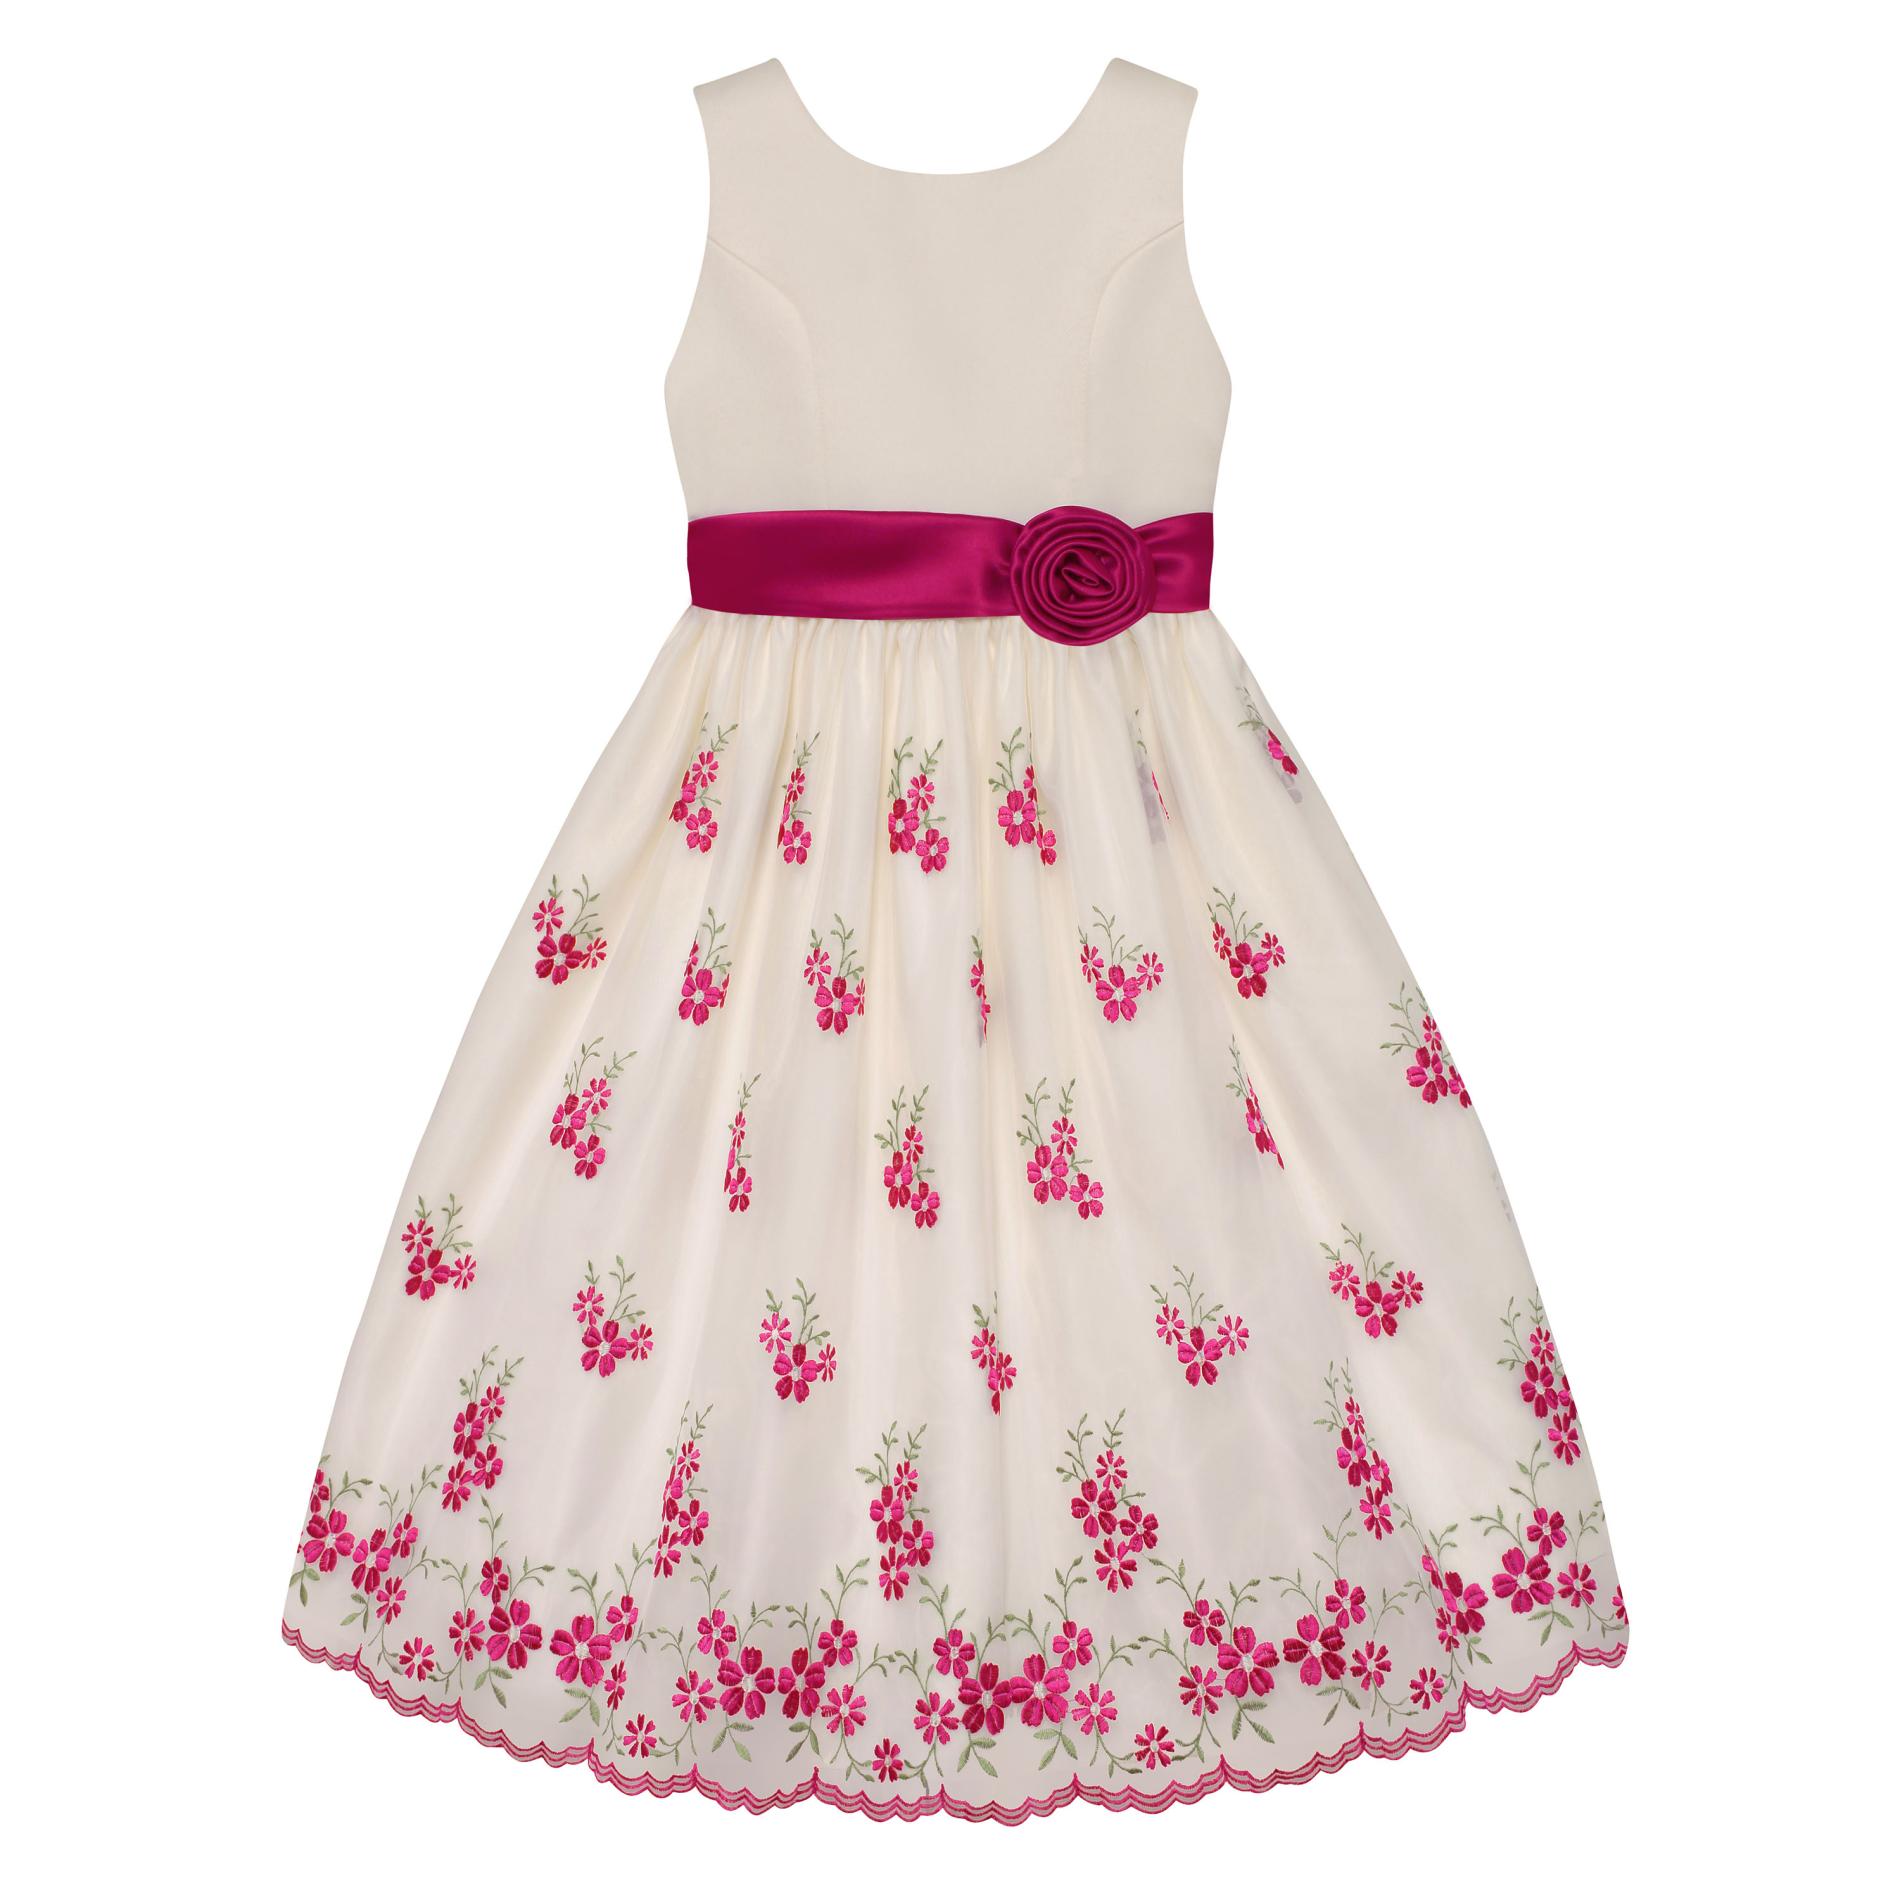 American Princess Girls' Embroidered Occasion Dress